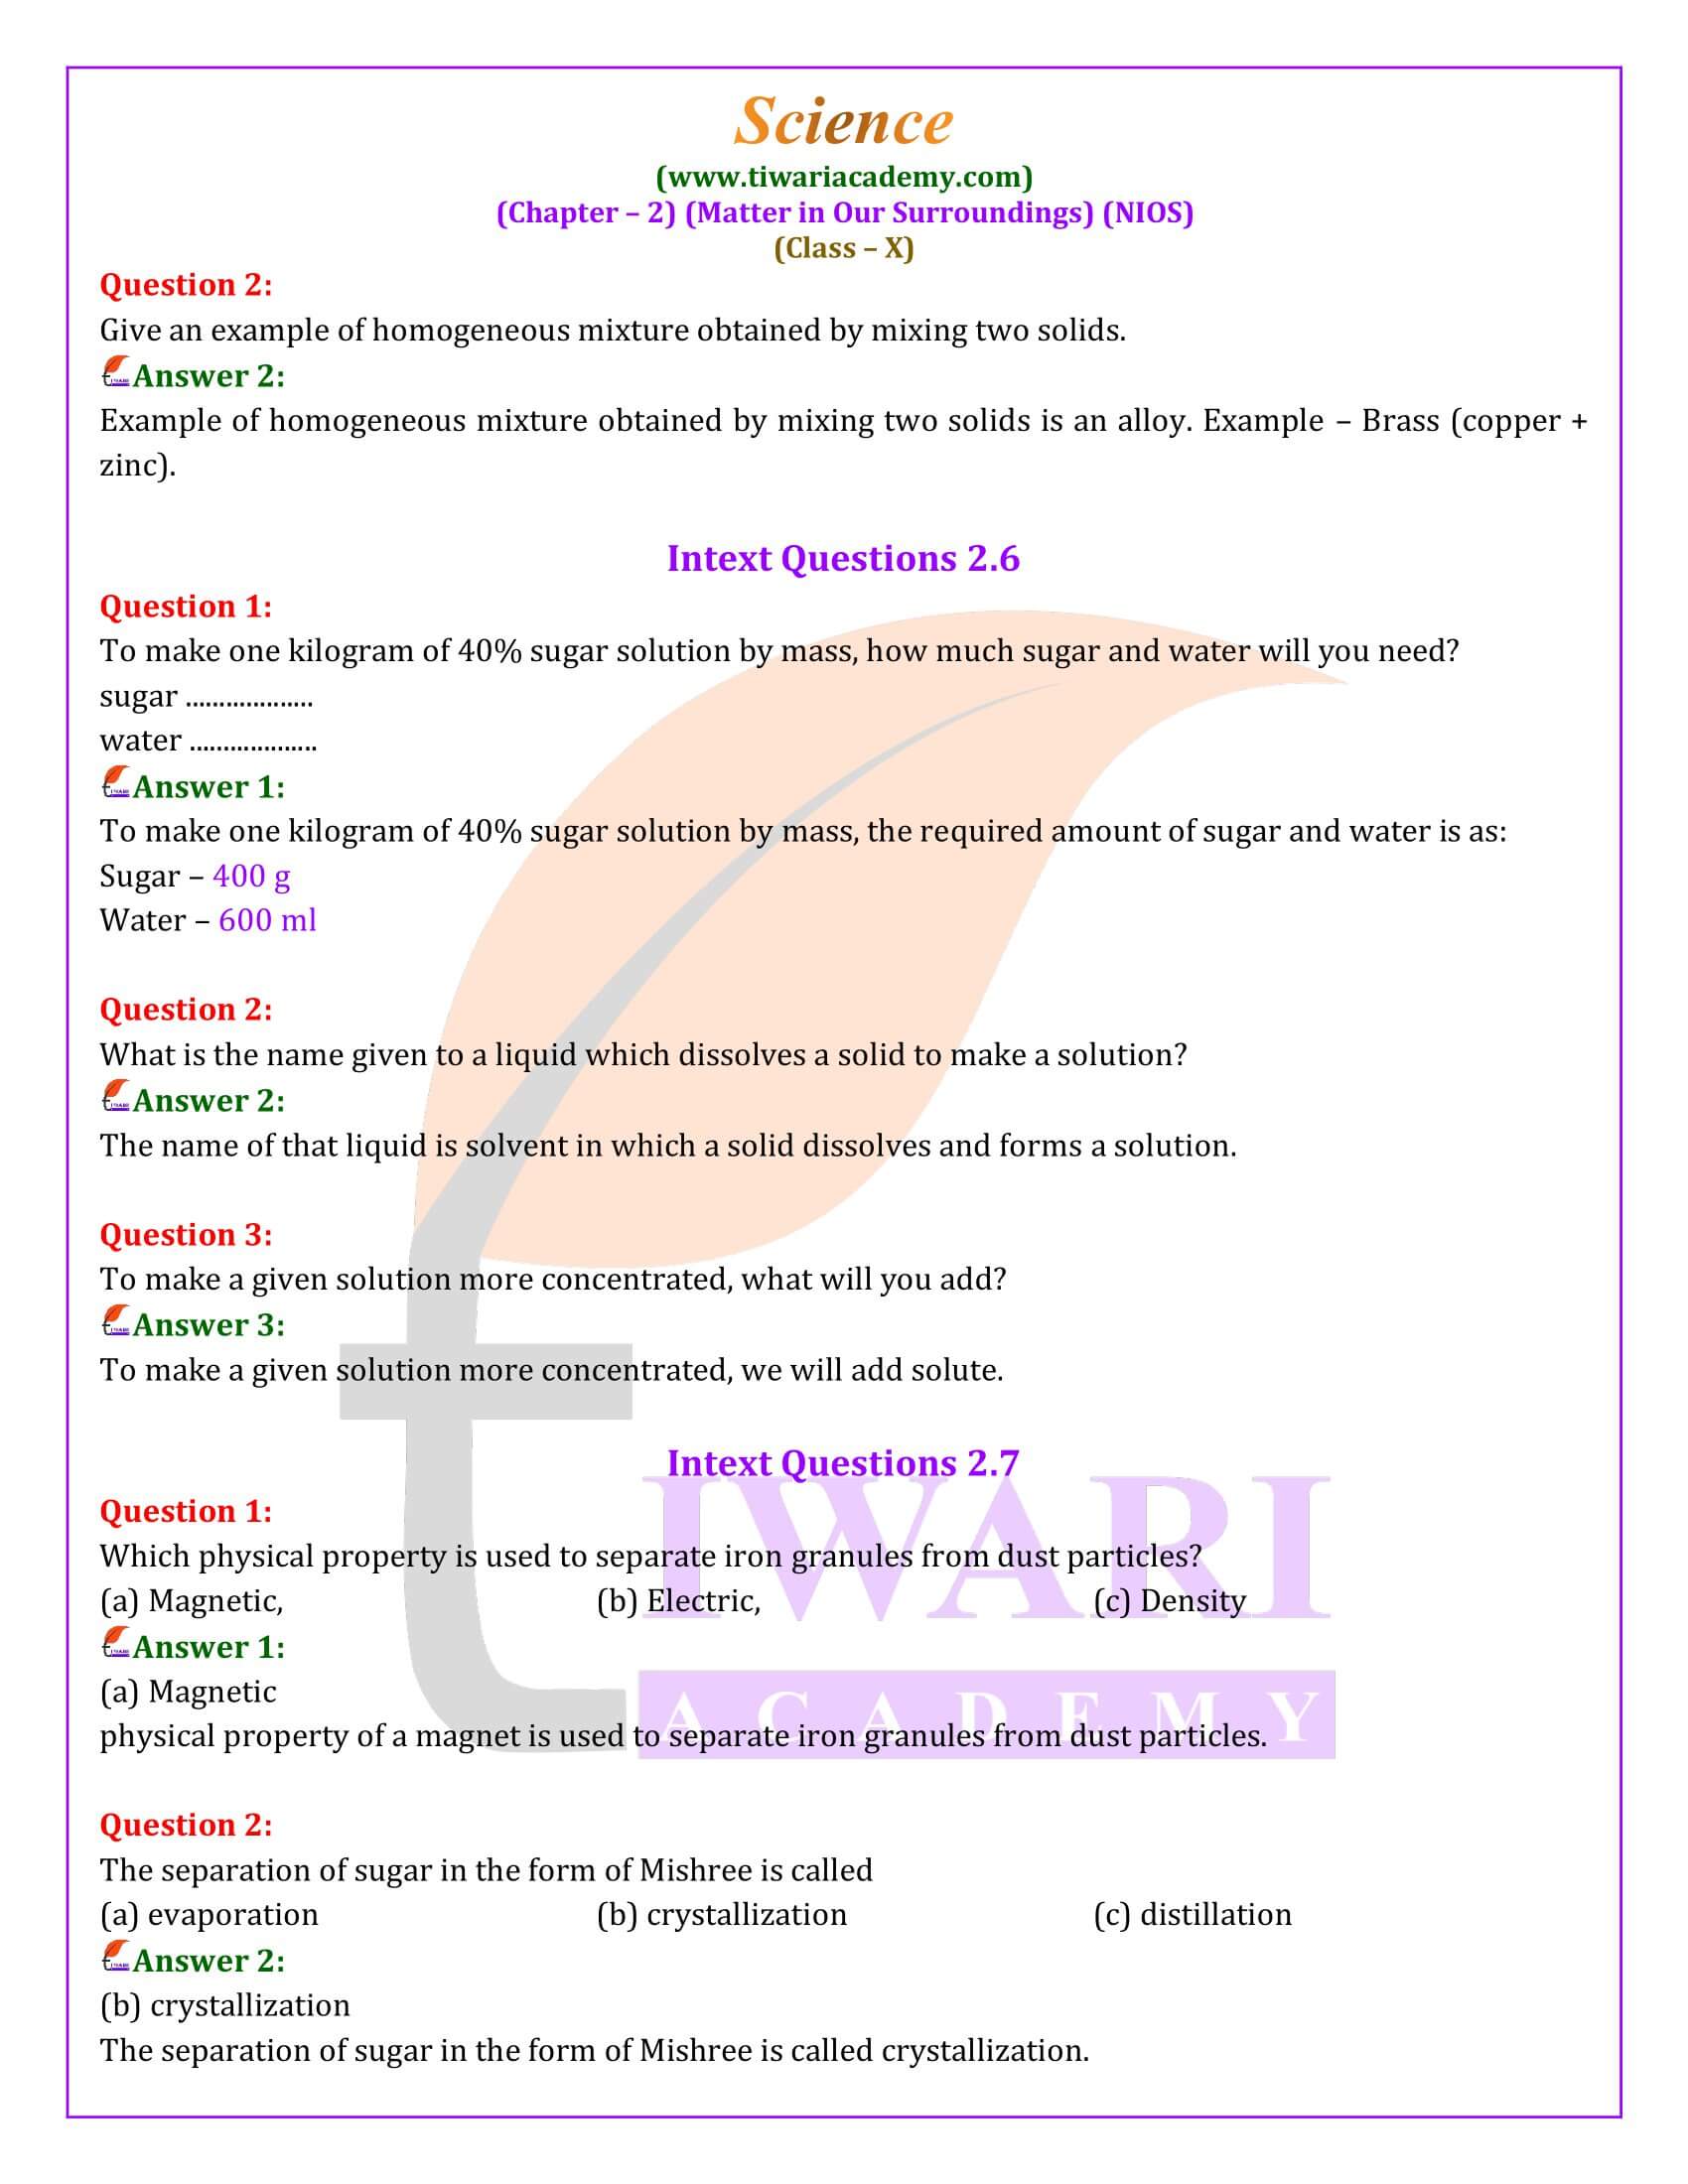 NIOS Class 10 Science Chapter 2 Answers